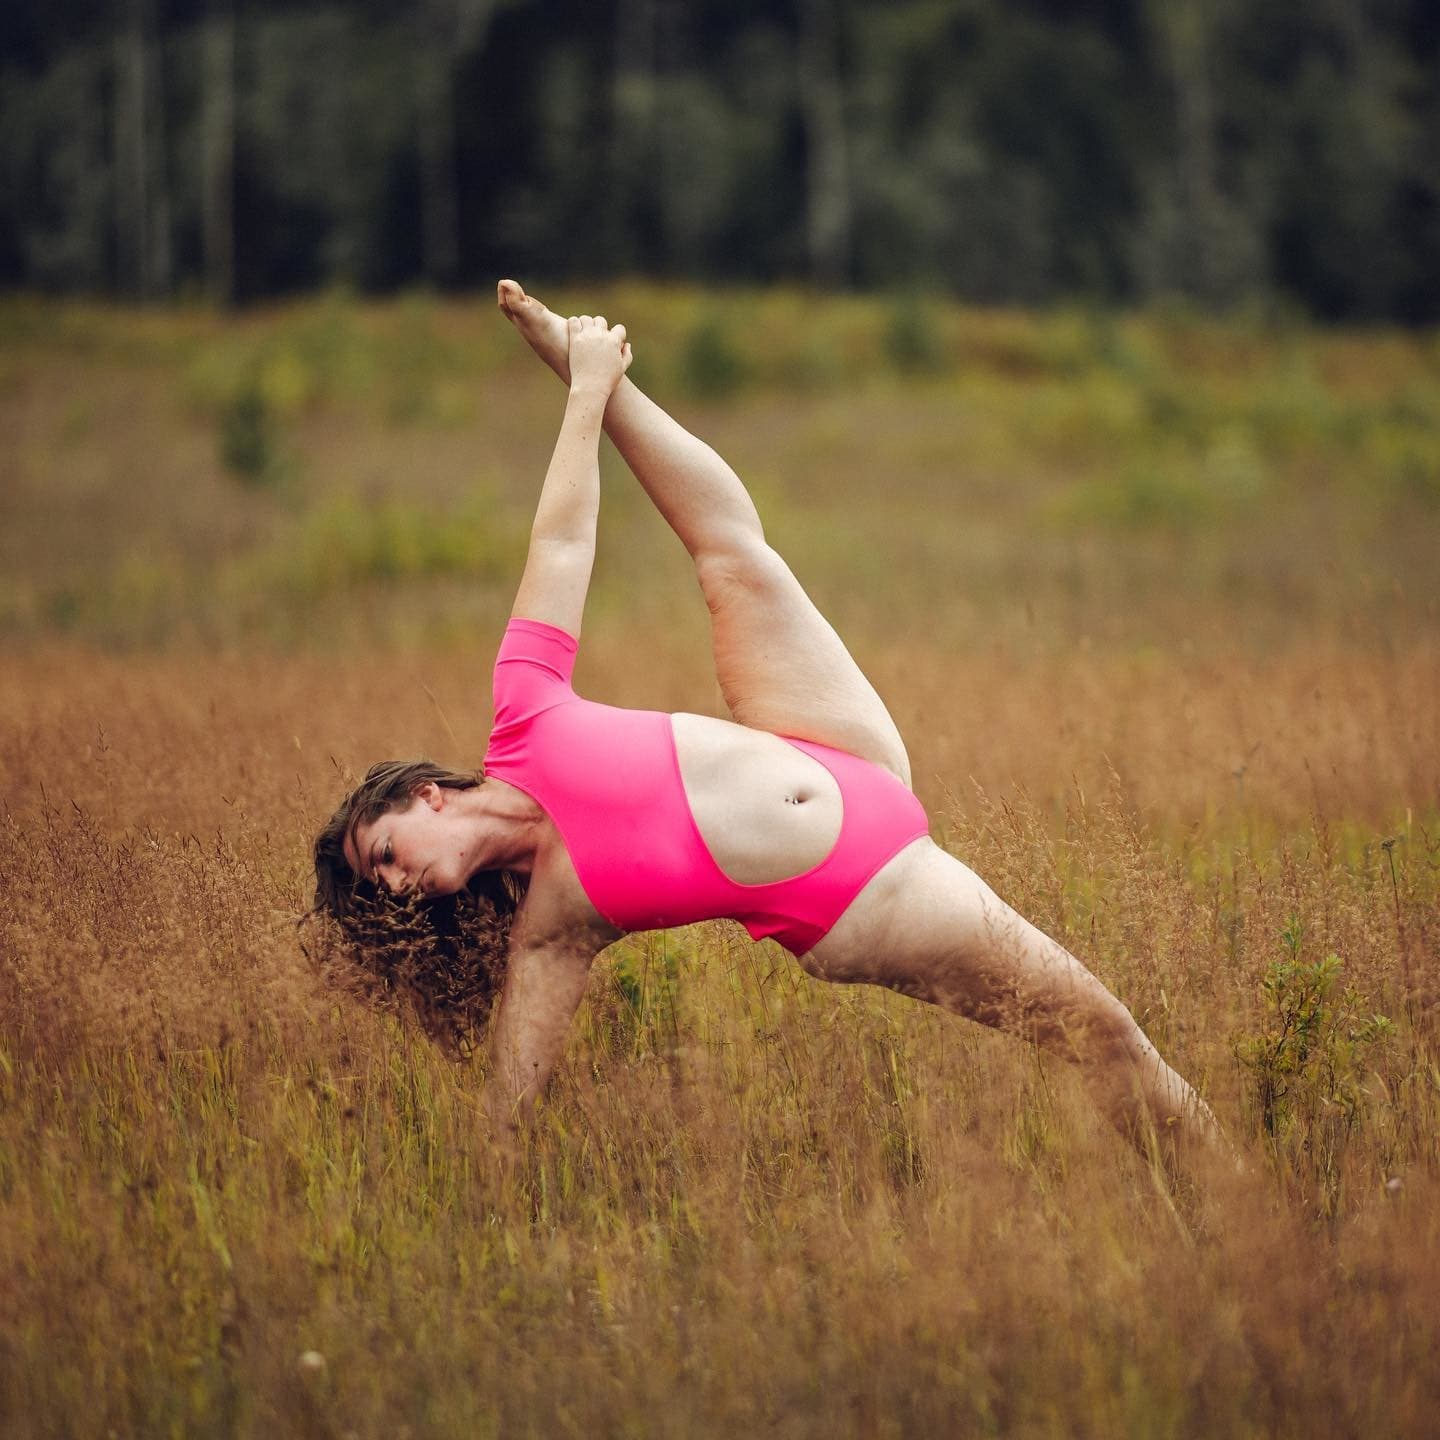 @vanessaeilene wearing a hot pink cut-out, one-sleeve bodysuit while stretching in an open field. 